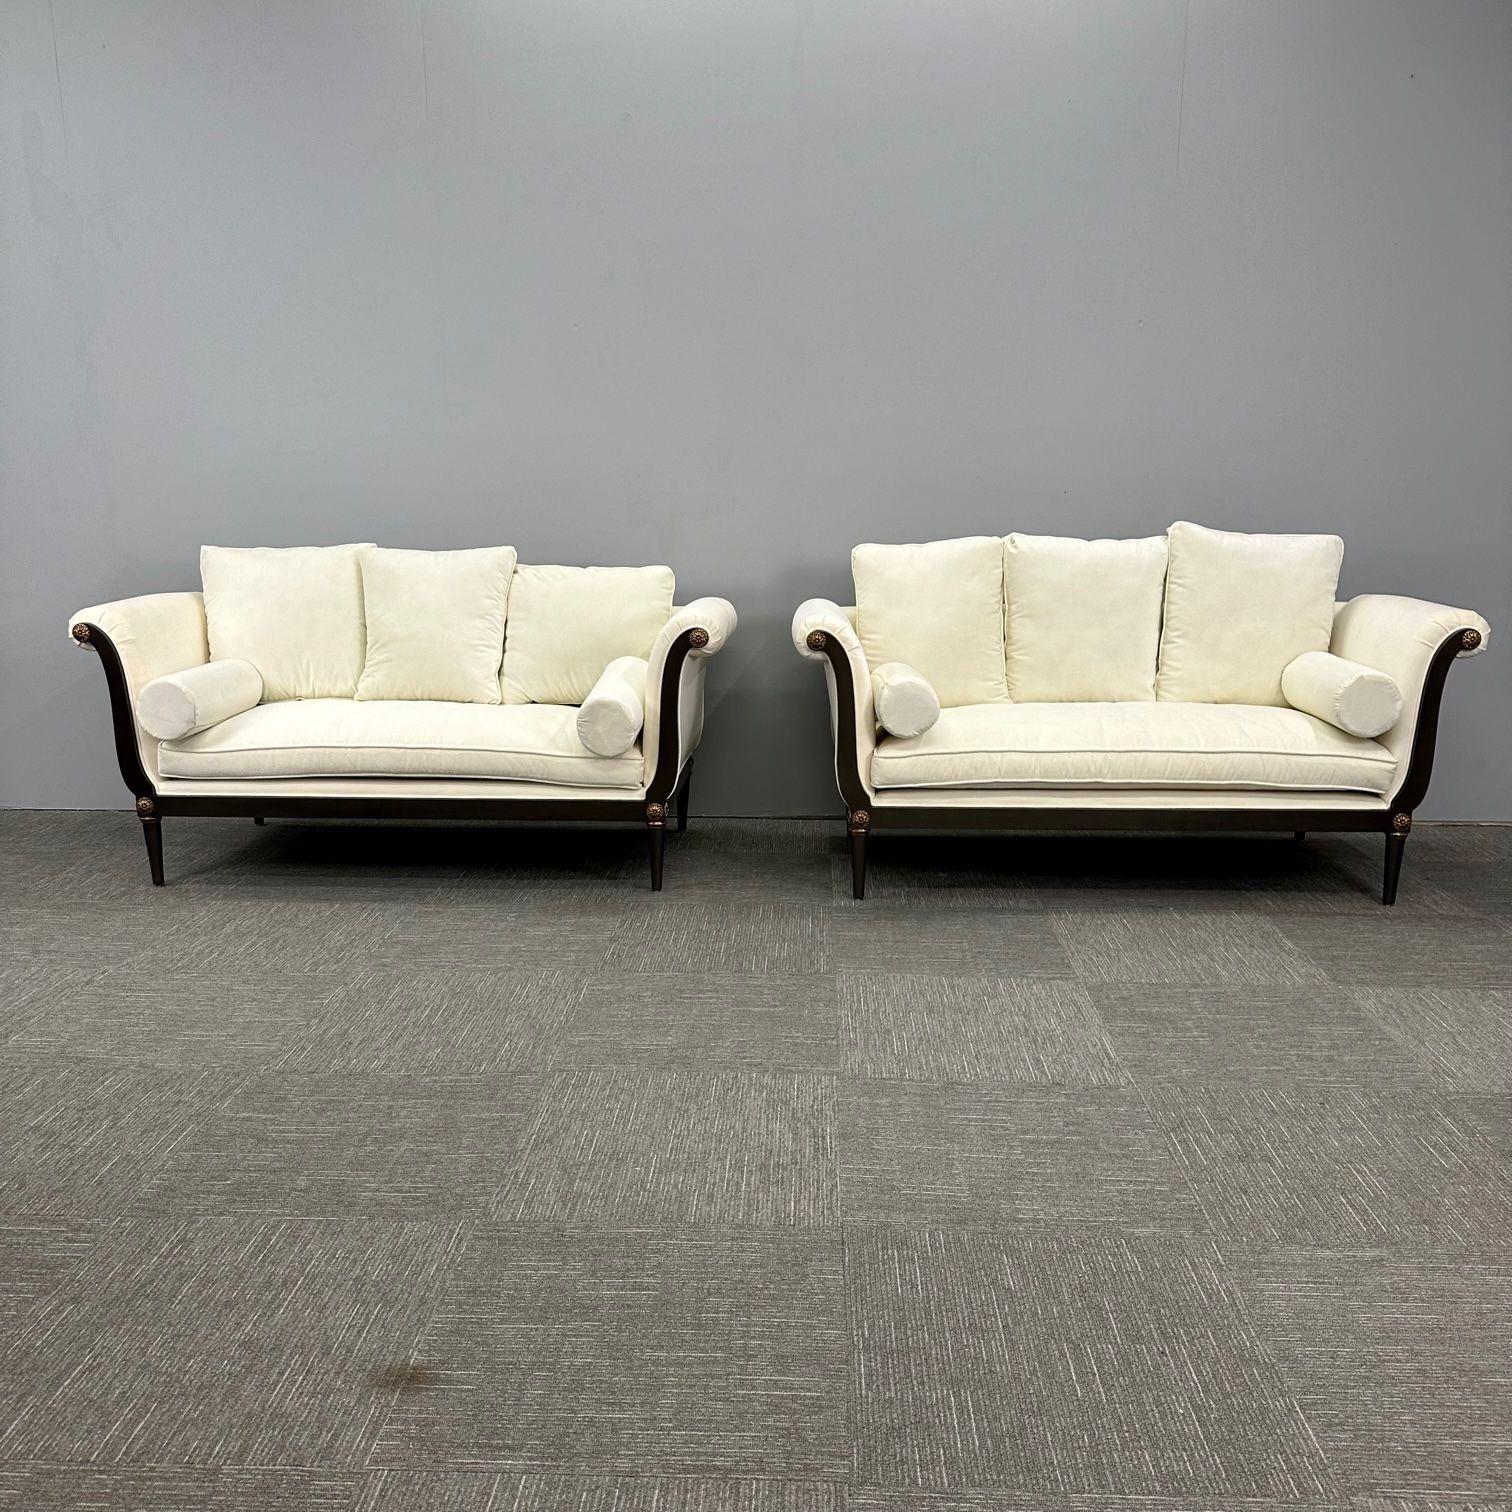 Pair of Hollywood Regency Vesey Style Sofas / Settee, Wood Frames with Bronze Mounts, New 
 
Pair of Directoire style sofas or settees having solid wooden frames. These seating arrangements feature wood frames and gilt bronze florets, with straight